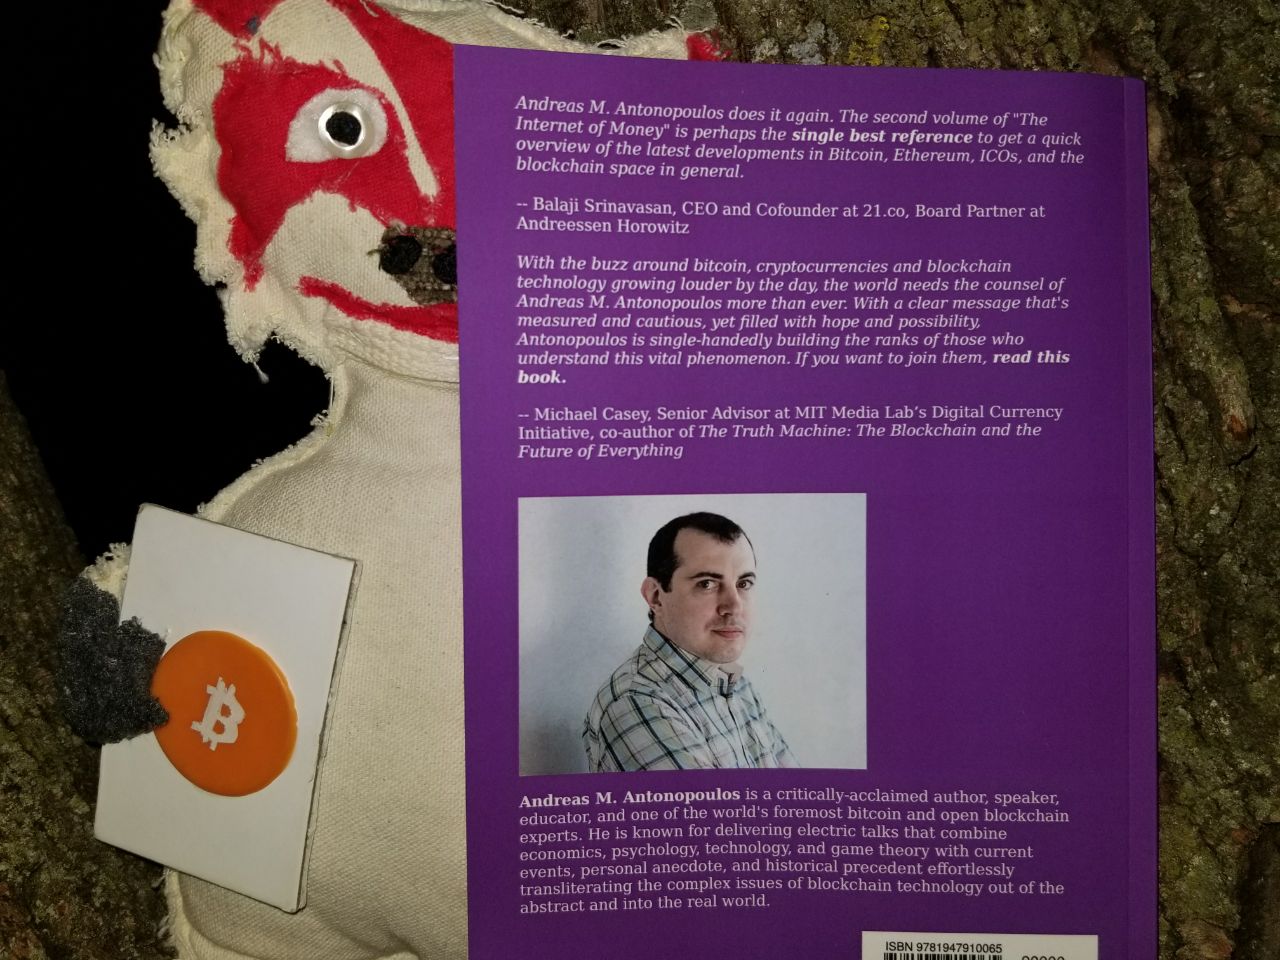 the-internet-of-money-volume-two-by-andreas-m-antonopoulos-2017-2018-back-cover